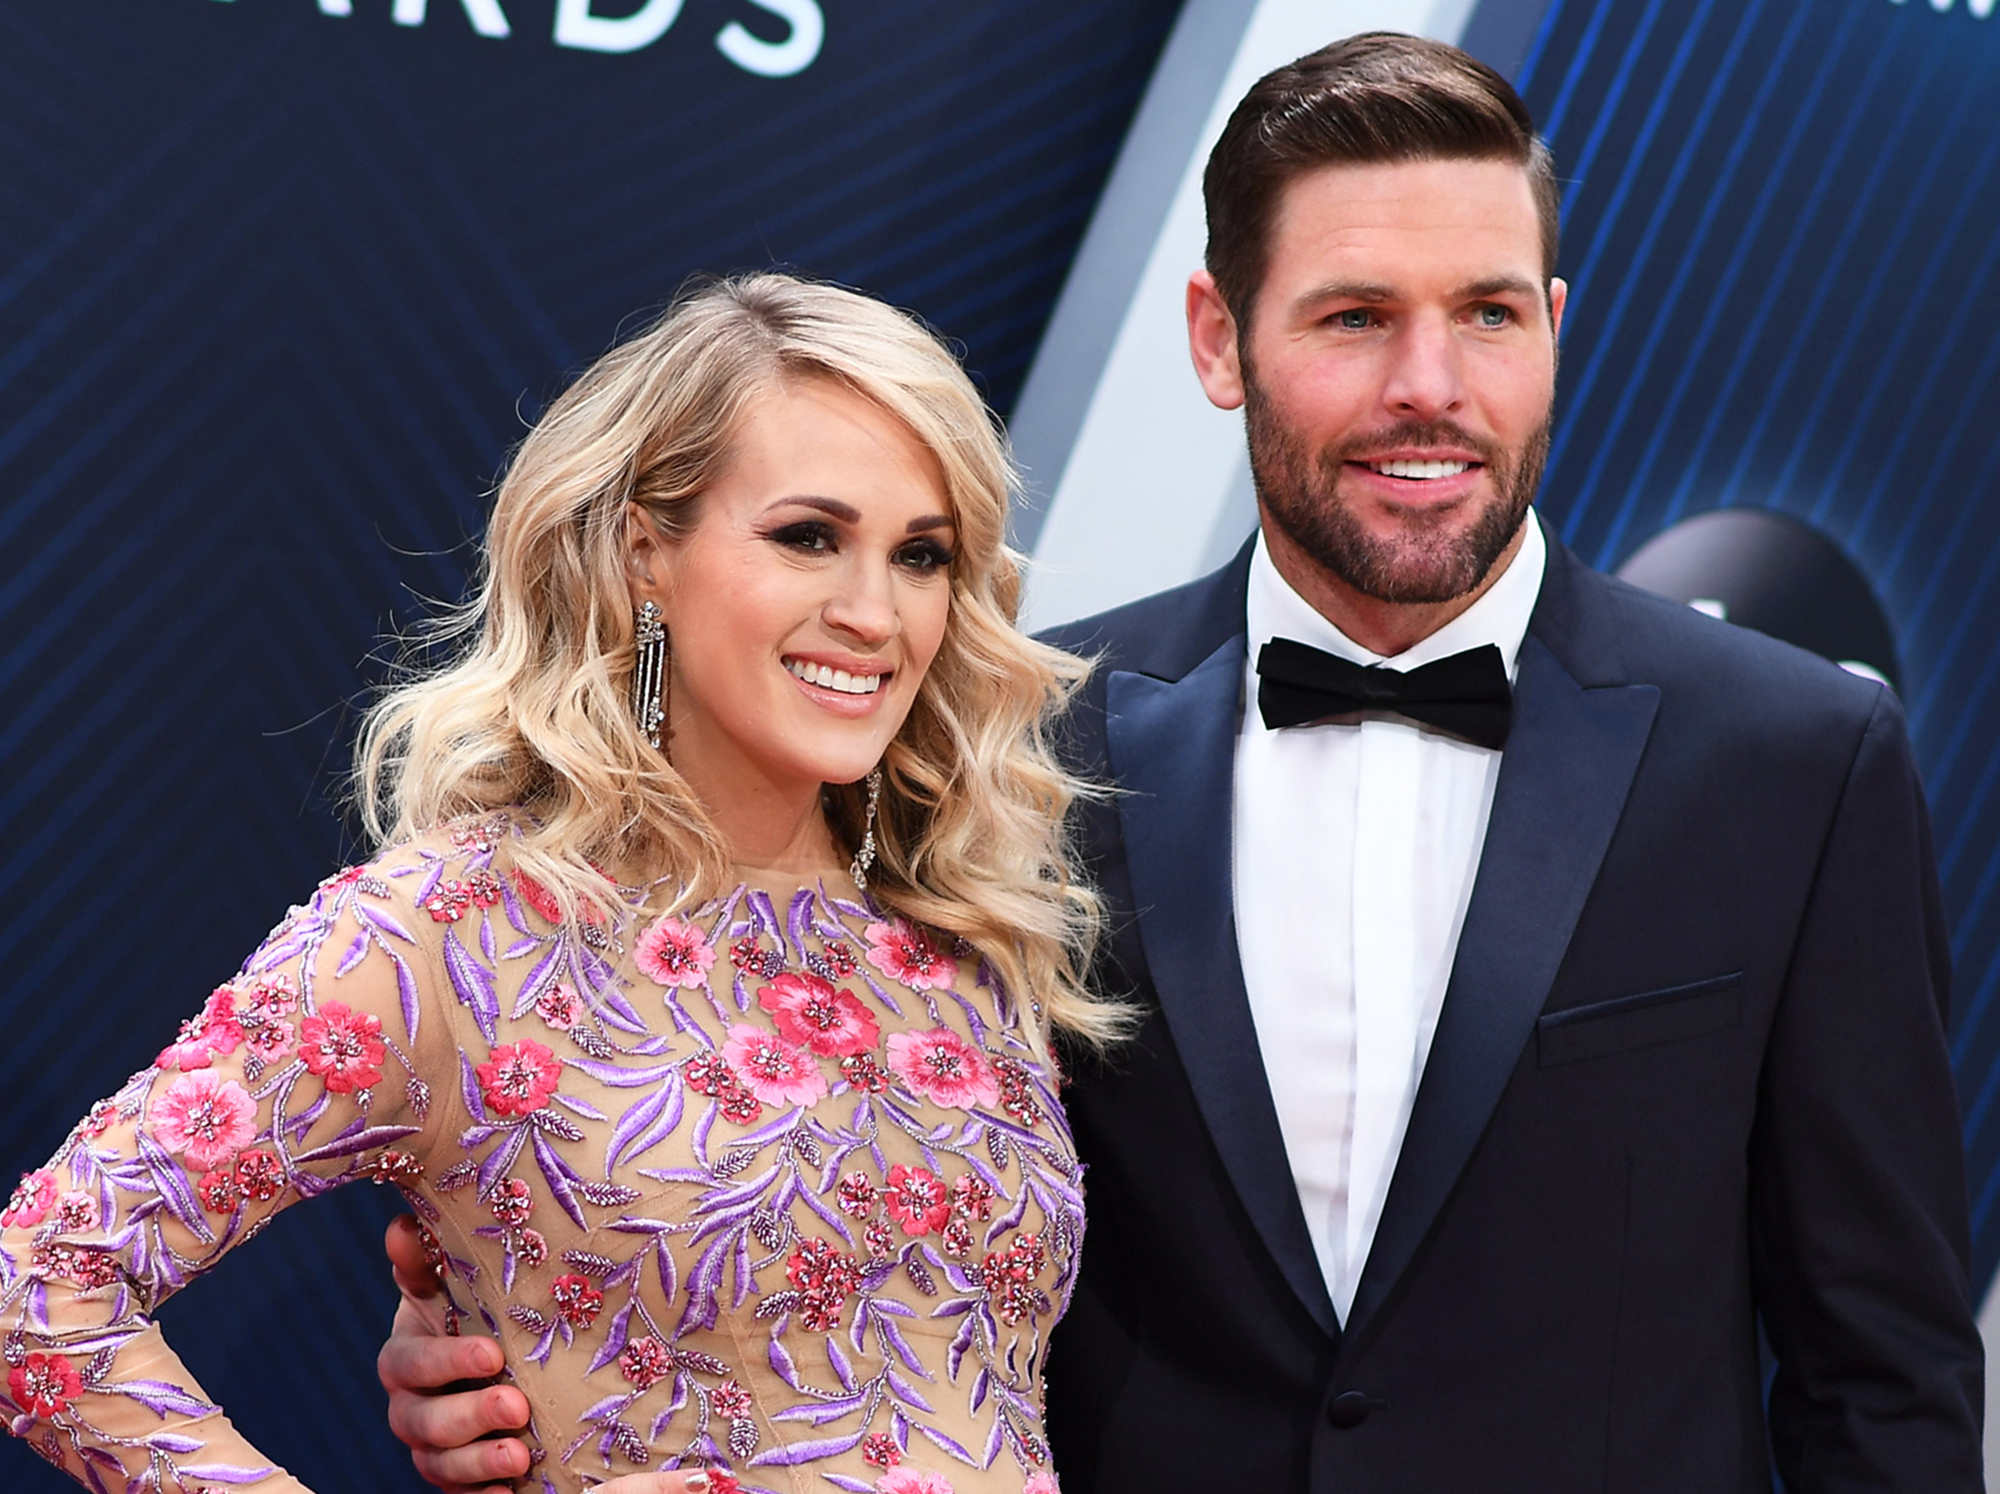 Carrie Underwood's 2 Kids: Everything to Know